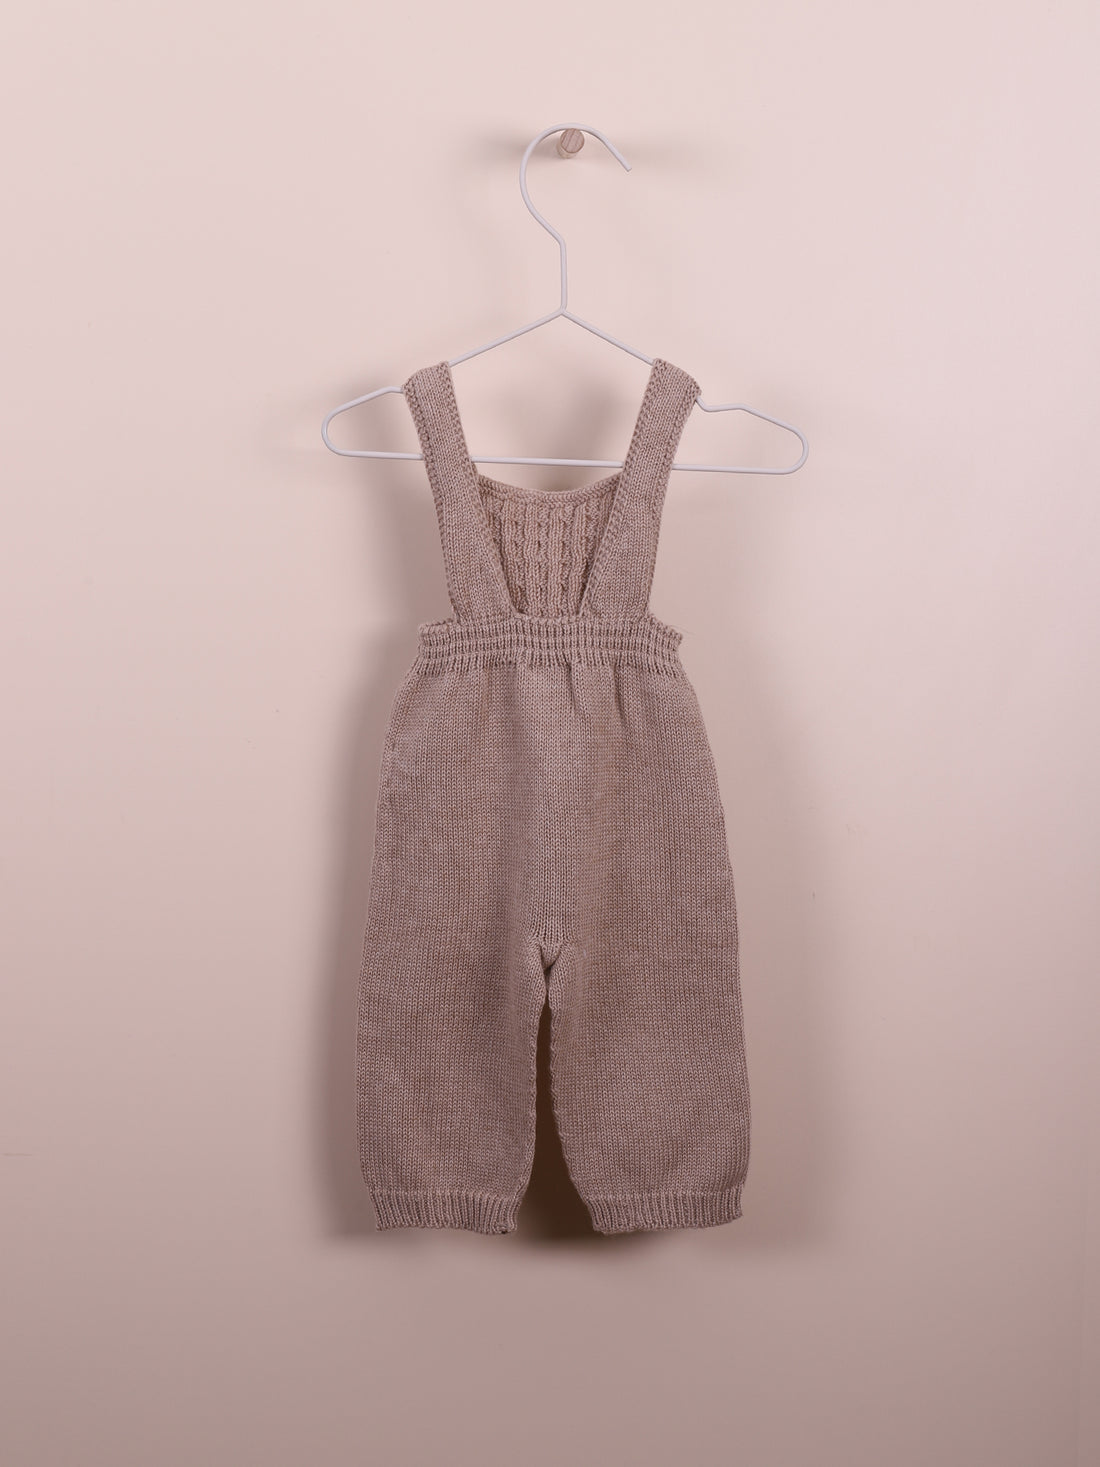 Shiloh Knit Overalls - Camel